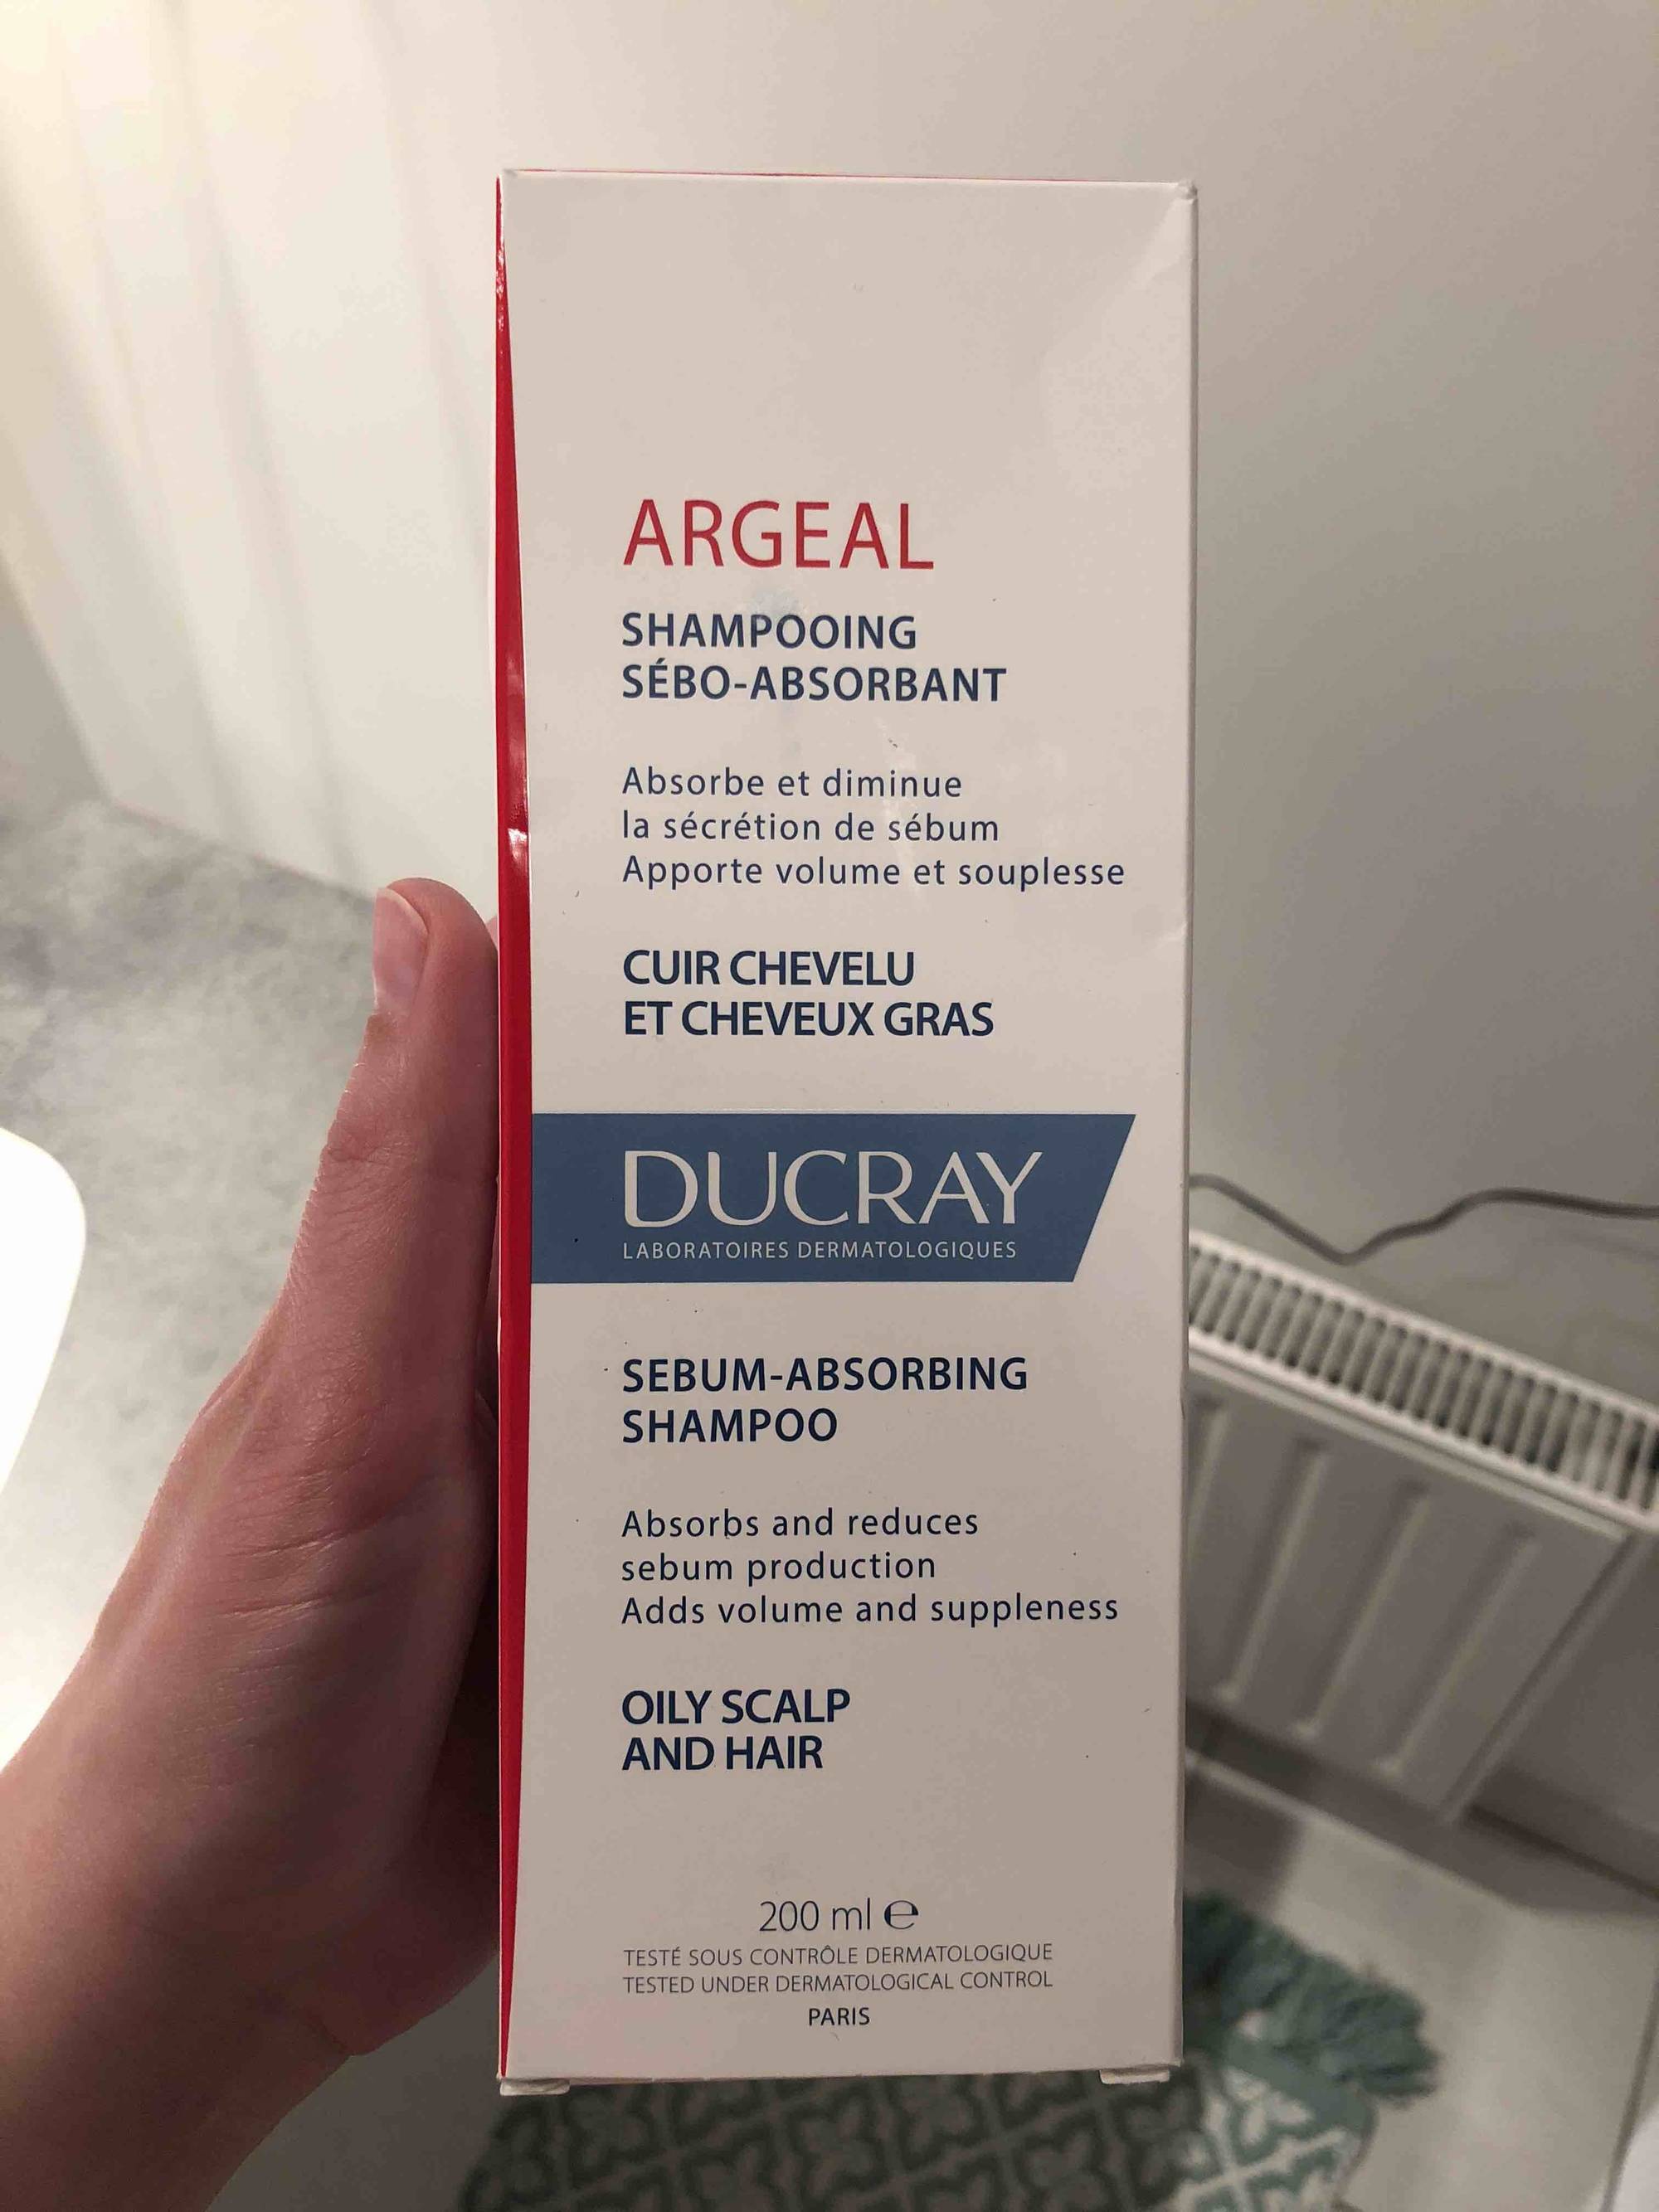 DUCRAY - Argeal - Shampooing sébo-absorbant